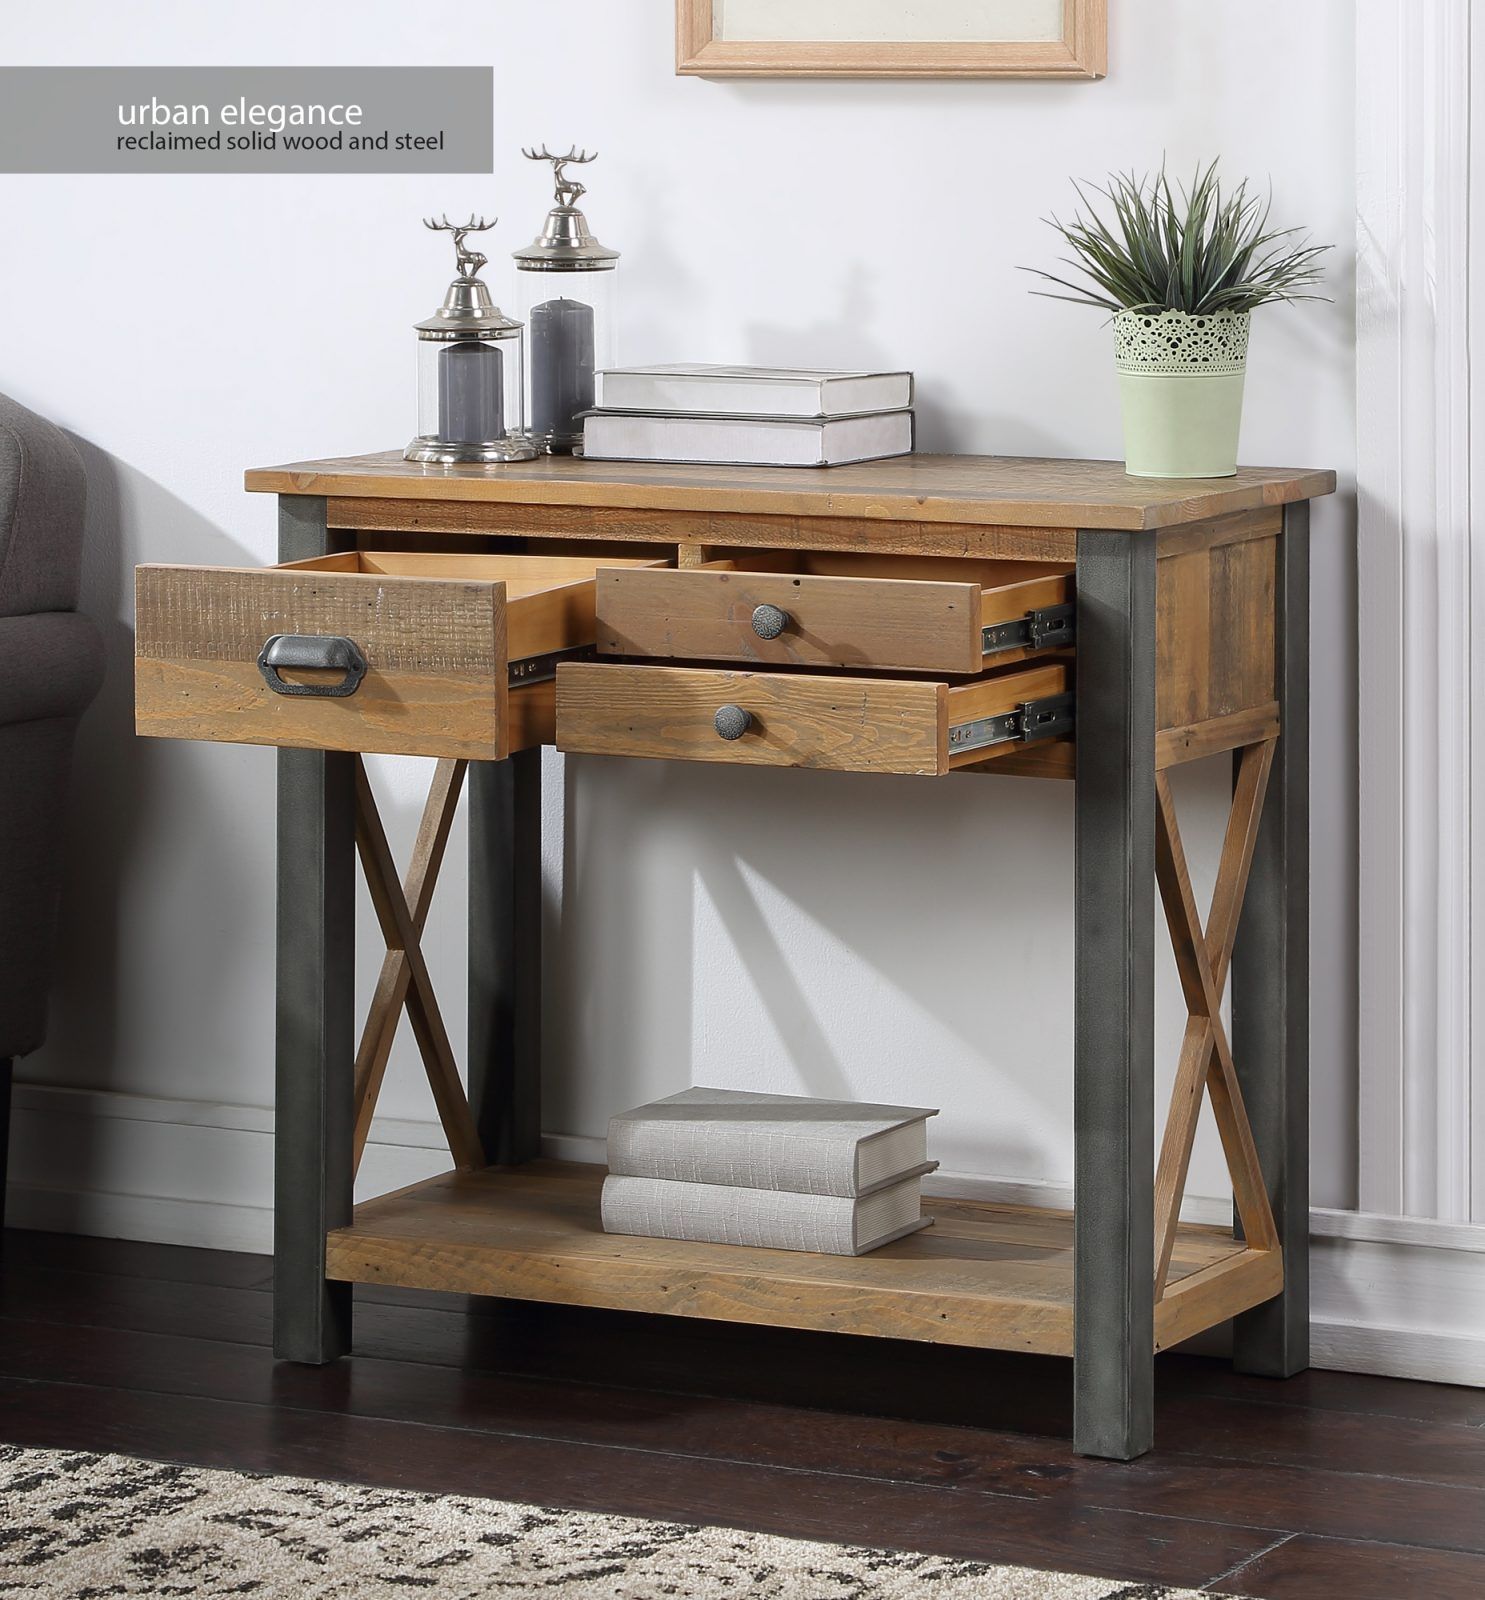 Urban Elegance – Reclaimed Small Console Table – Mango Intended For Natural Mango Wood Console Tables (View 7 of 20)